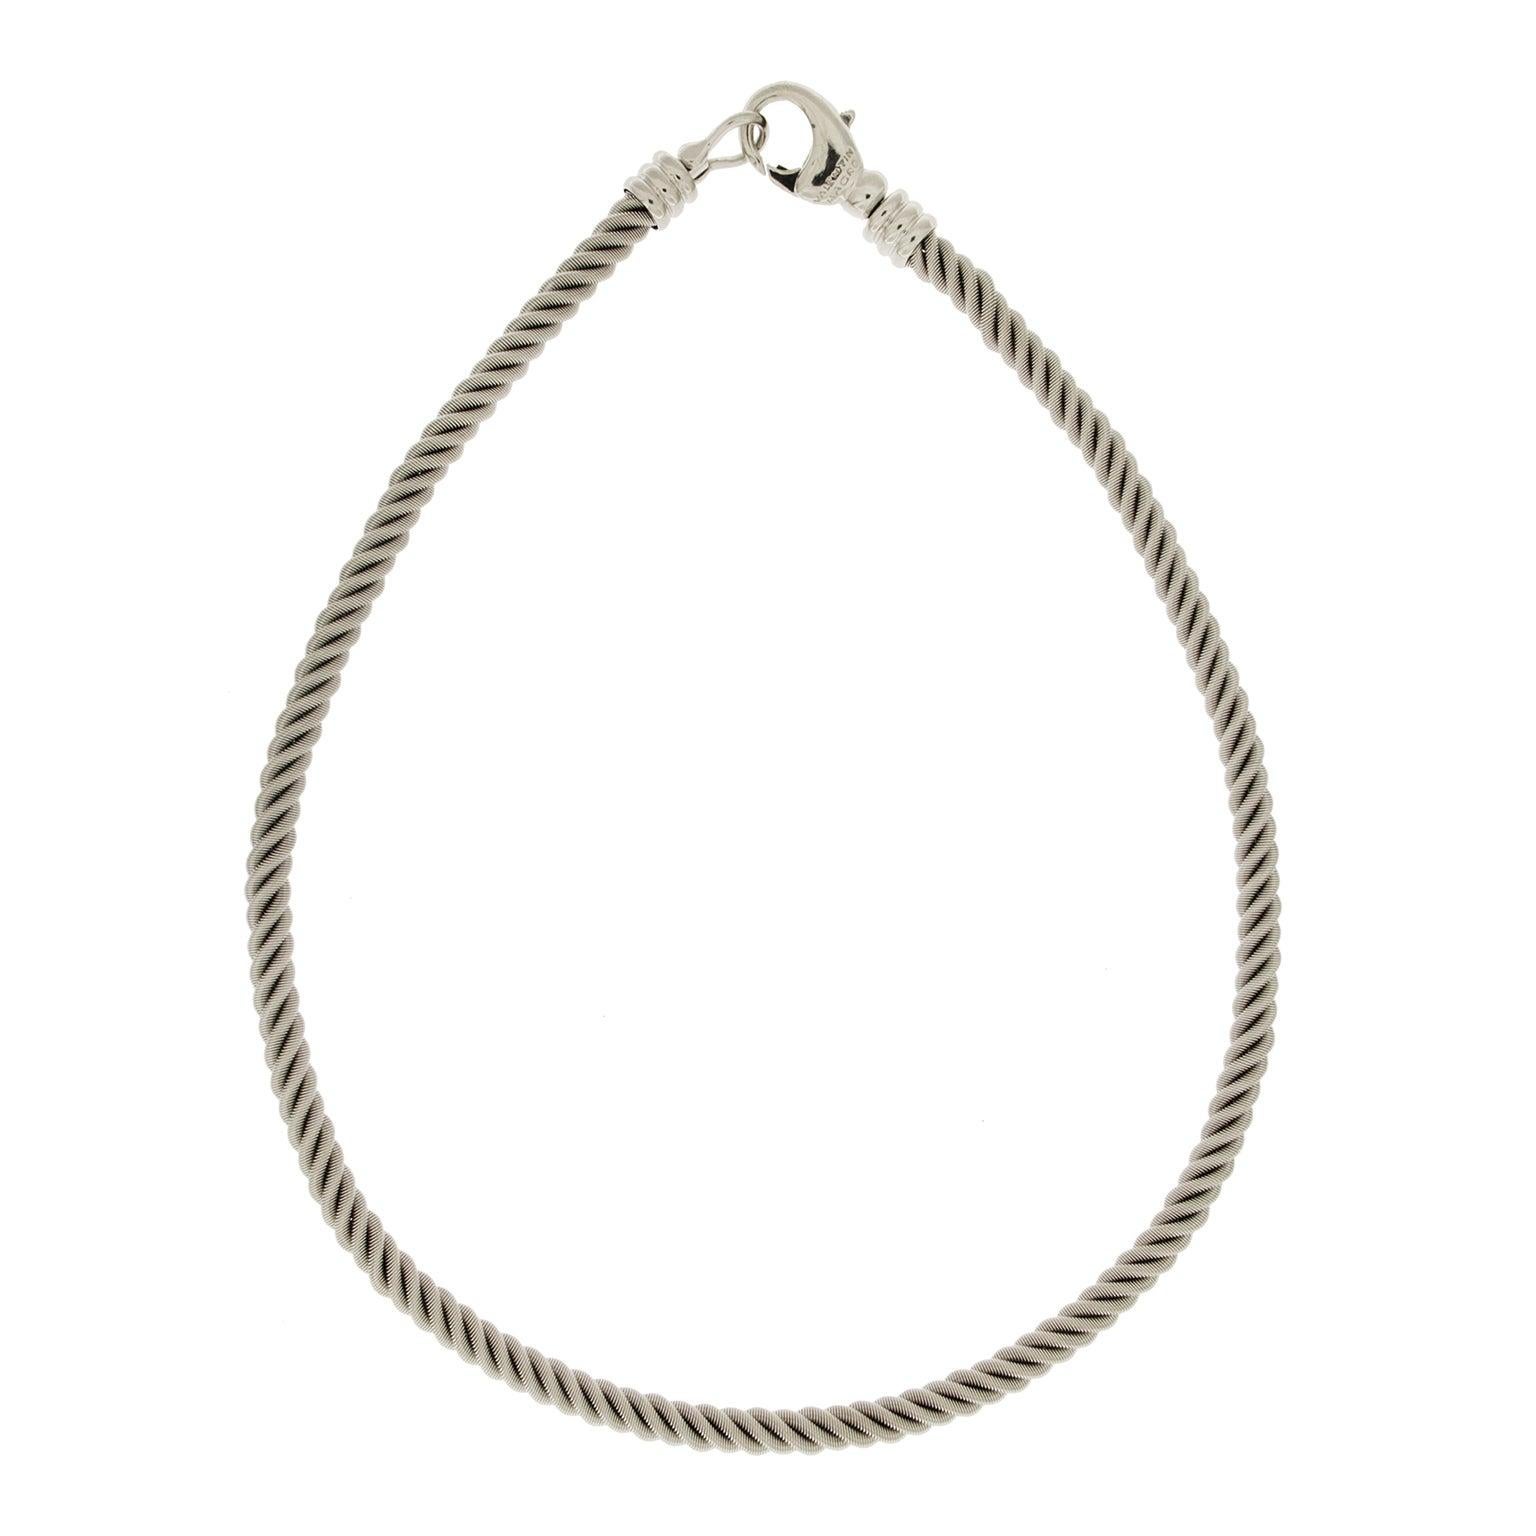 An understated elegance is emitted by this necklace. Slender strands of 18k white gold intertwine to form a design inspired by rope. The texture adds depth to the design. A lobster clasp of coordinating metal closes the necklace, which measures